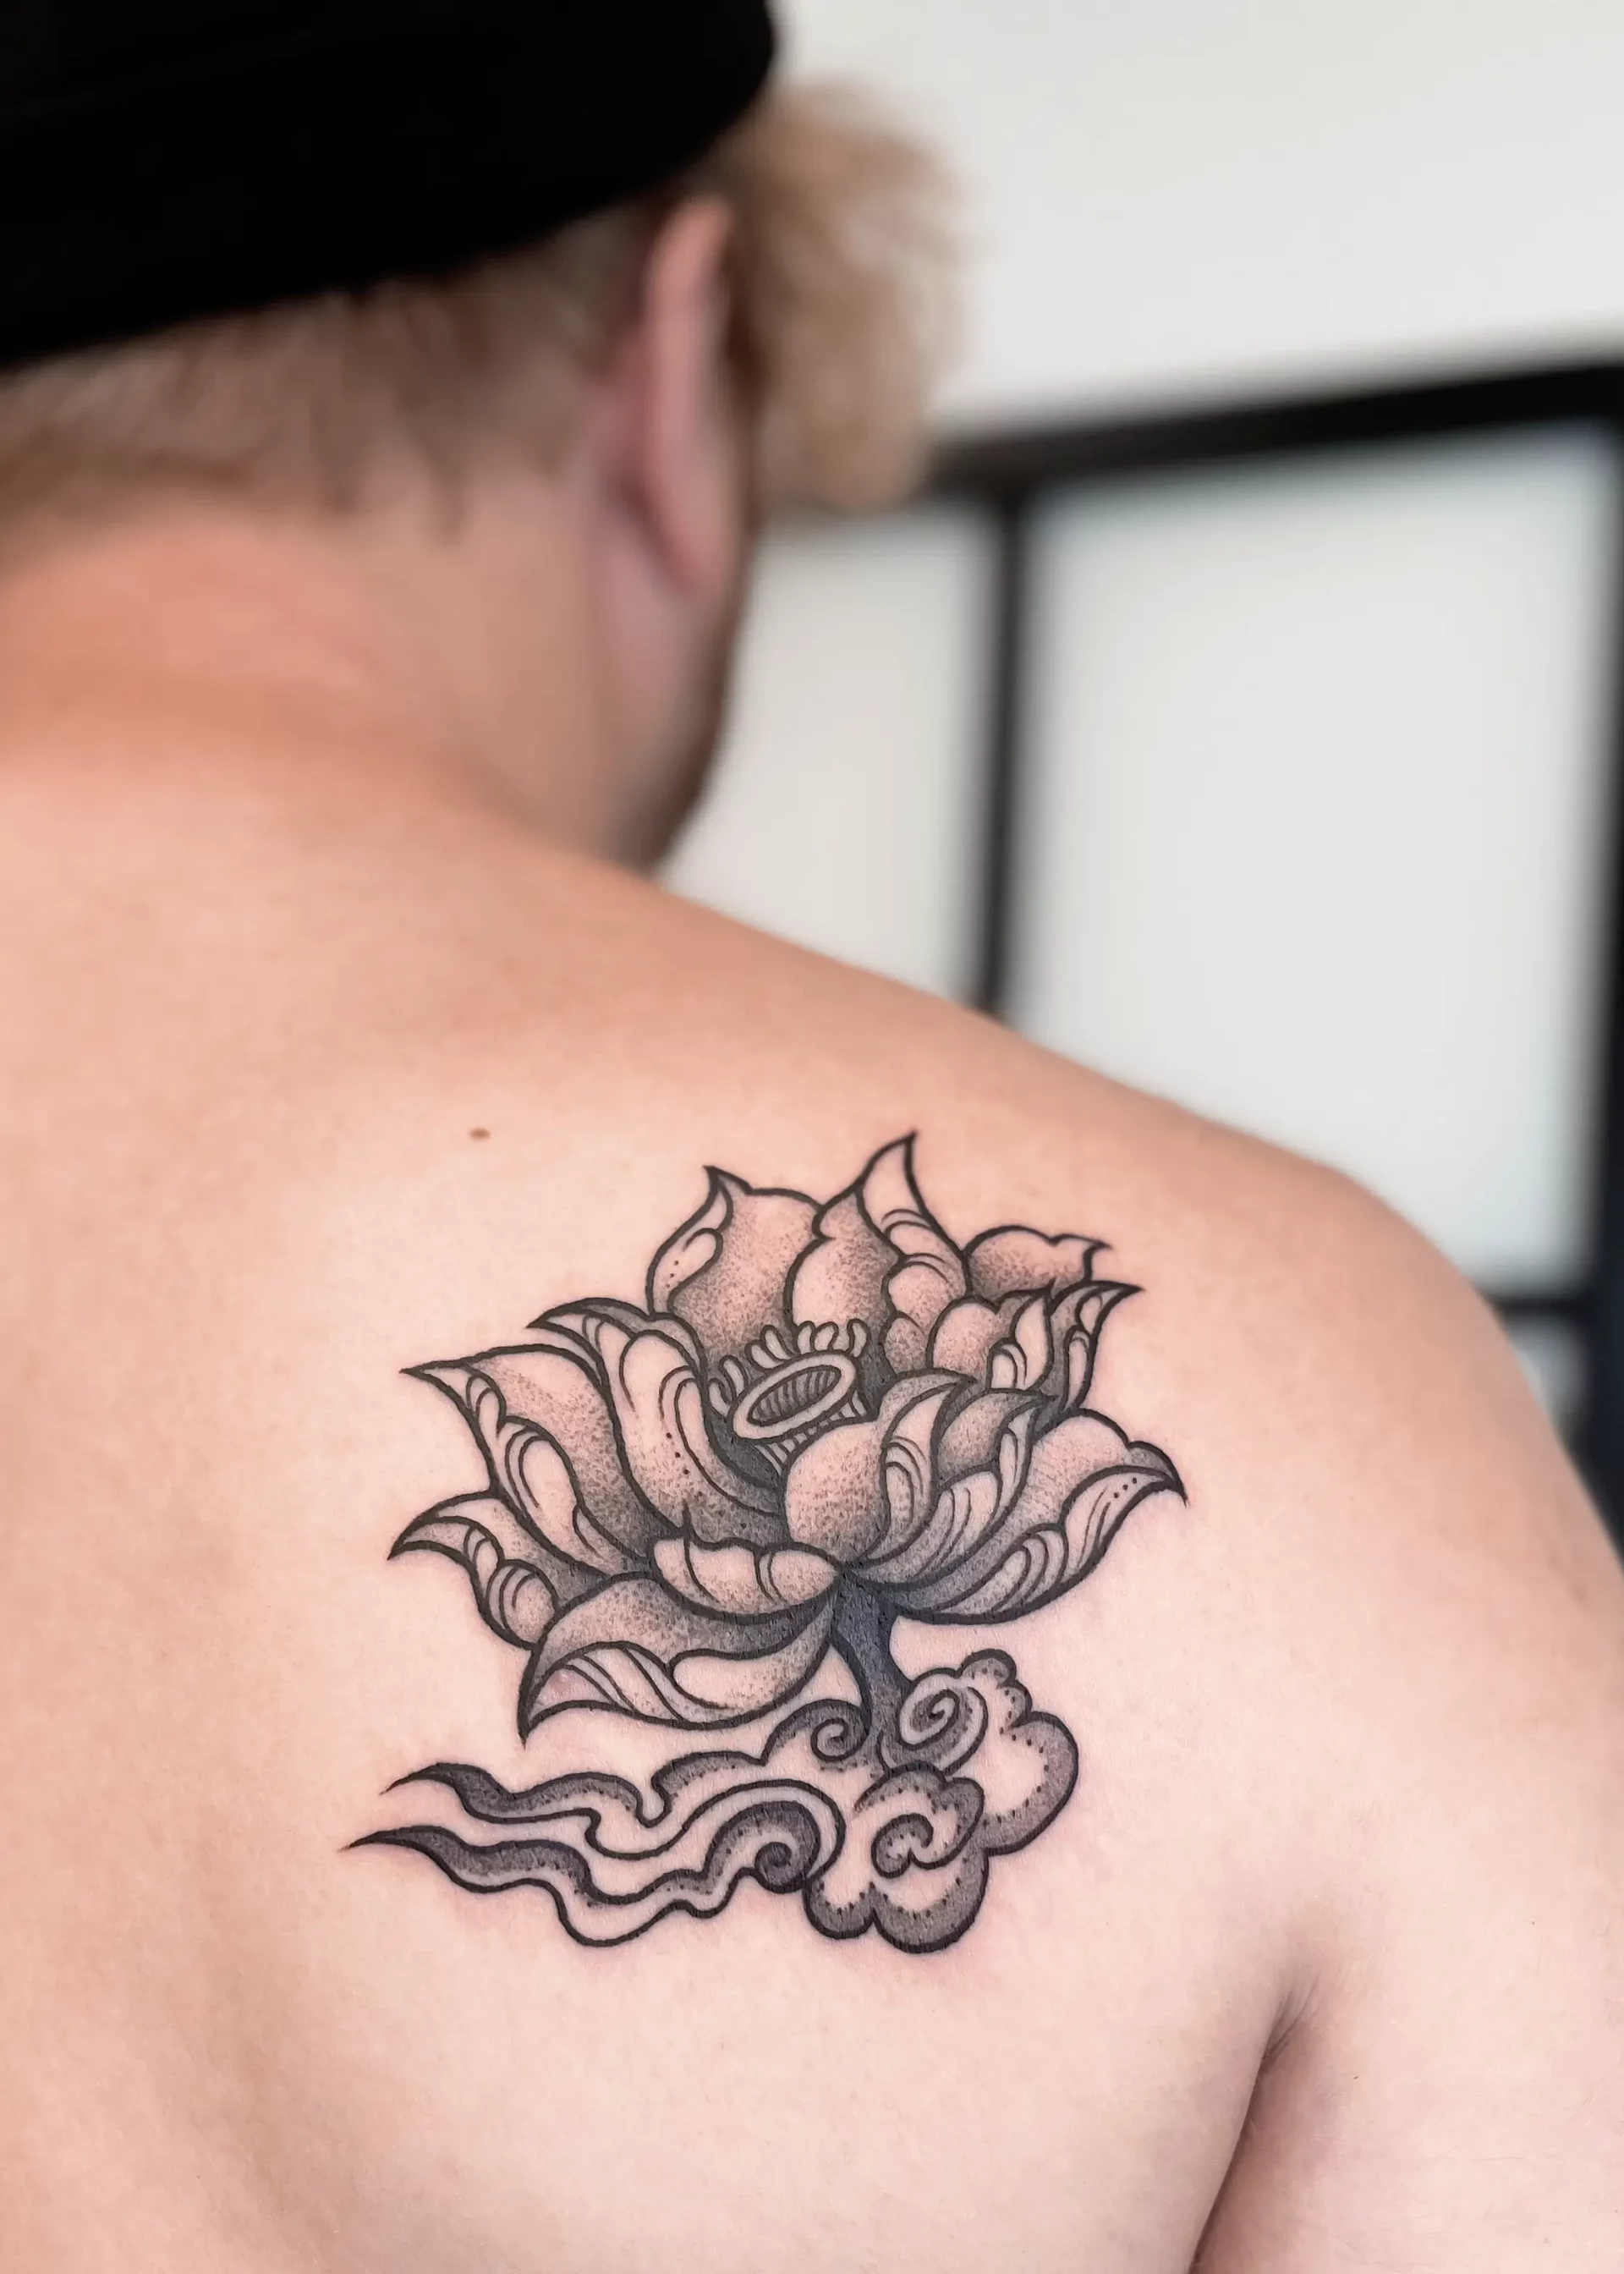 A man sporting a black and white tattoo of a lotus flower on his right shoulder